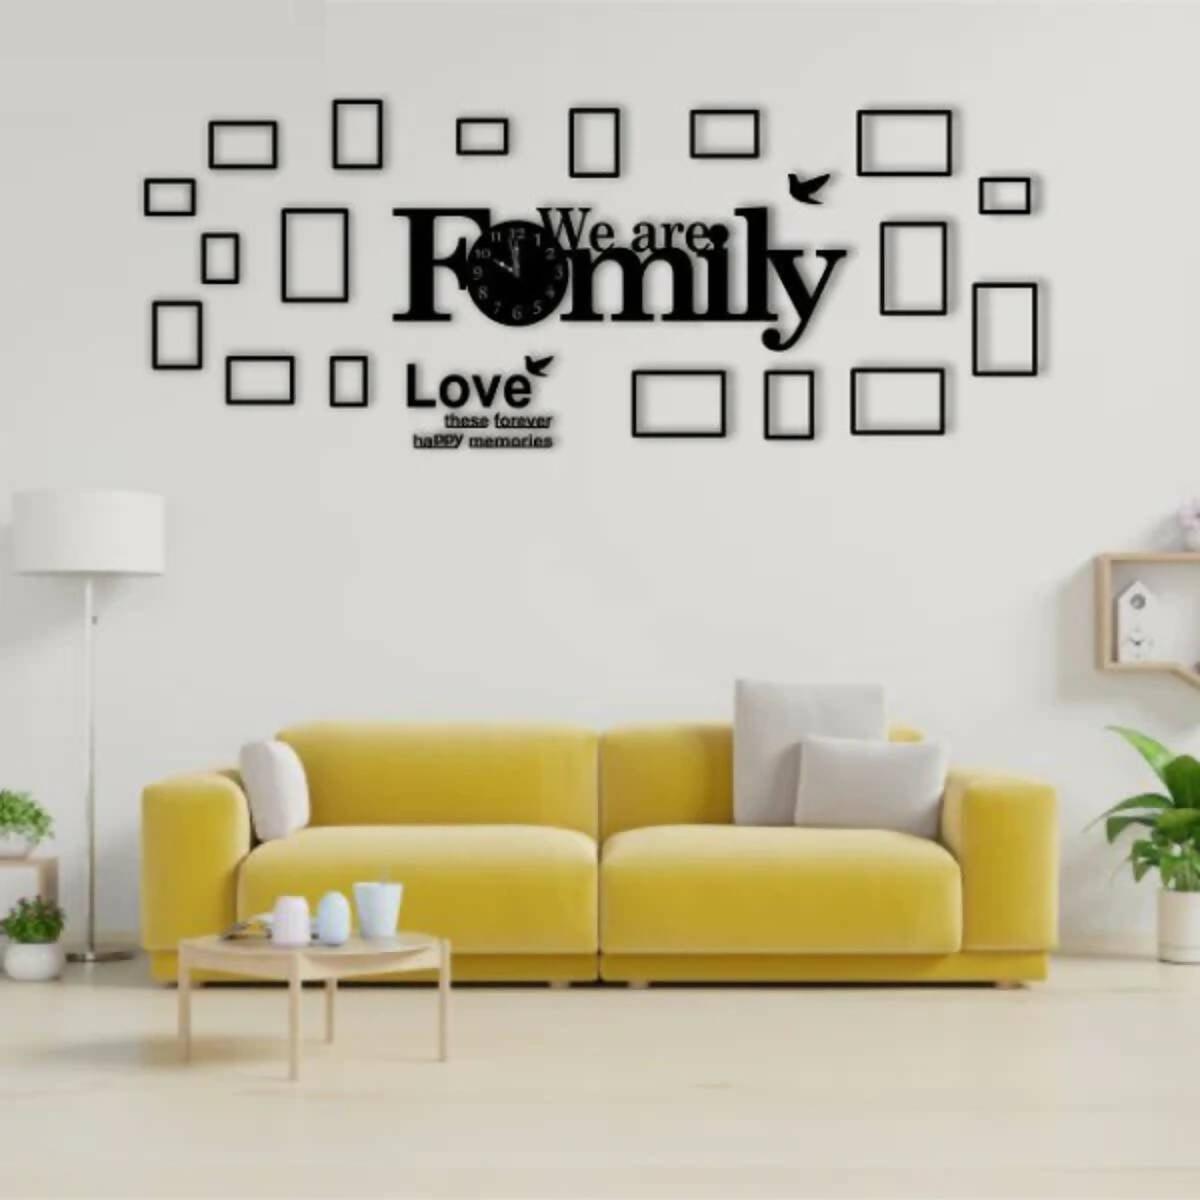 New Big Wooden We Are Family Diy Wall Clock With Frames Modern Design 3d Mirror Large Decorative - ValueBox